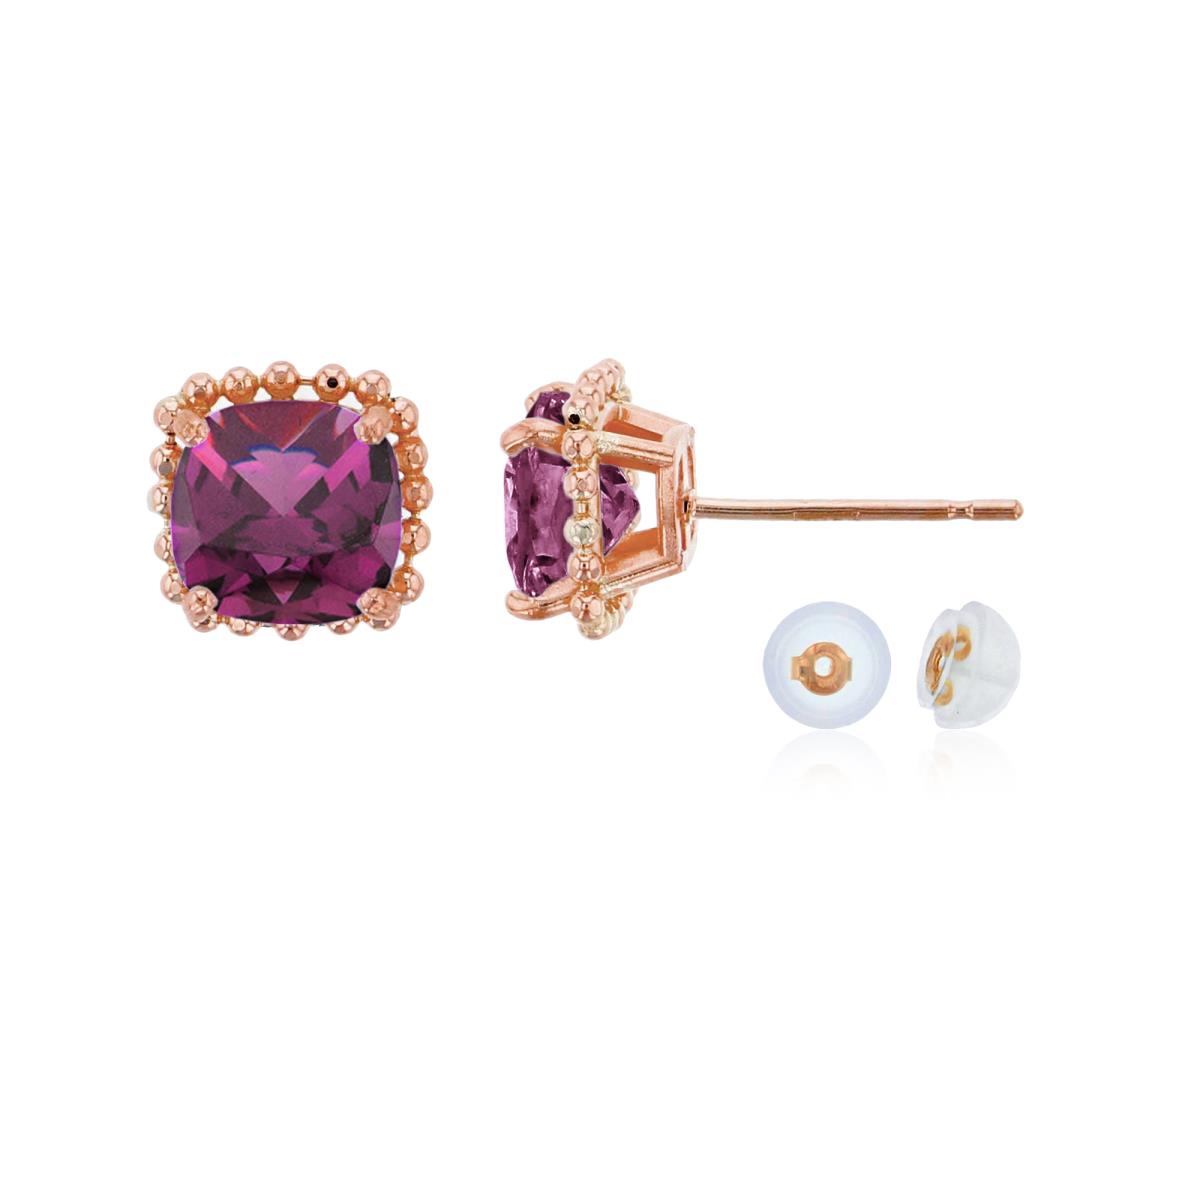 10K Rose Gold 6x6mm Cushion Cut Rhodolite Bead Frame Stud Earring with Silicone Back